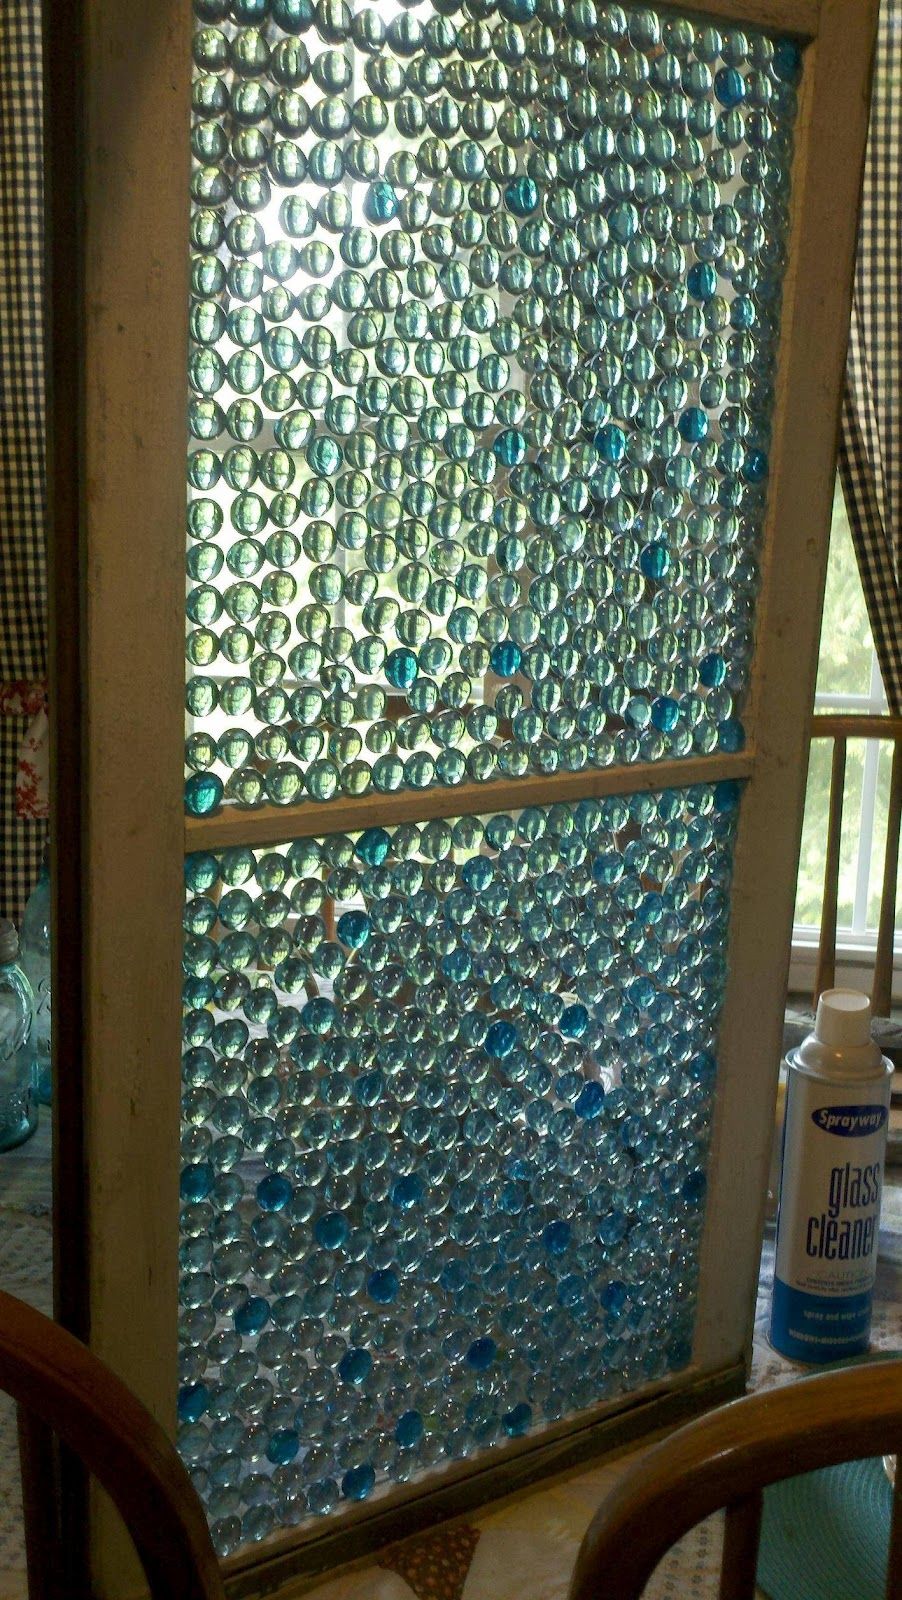 Glass Pebbles from the Dollar Store create this stain glass window look.